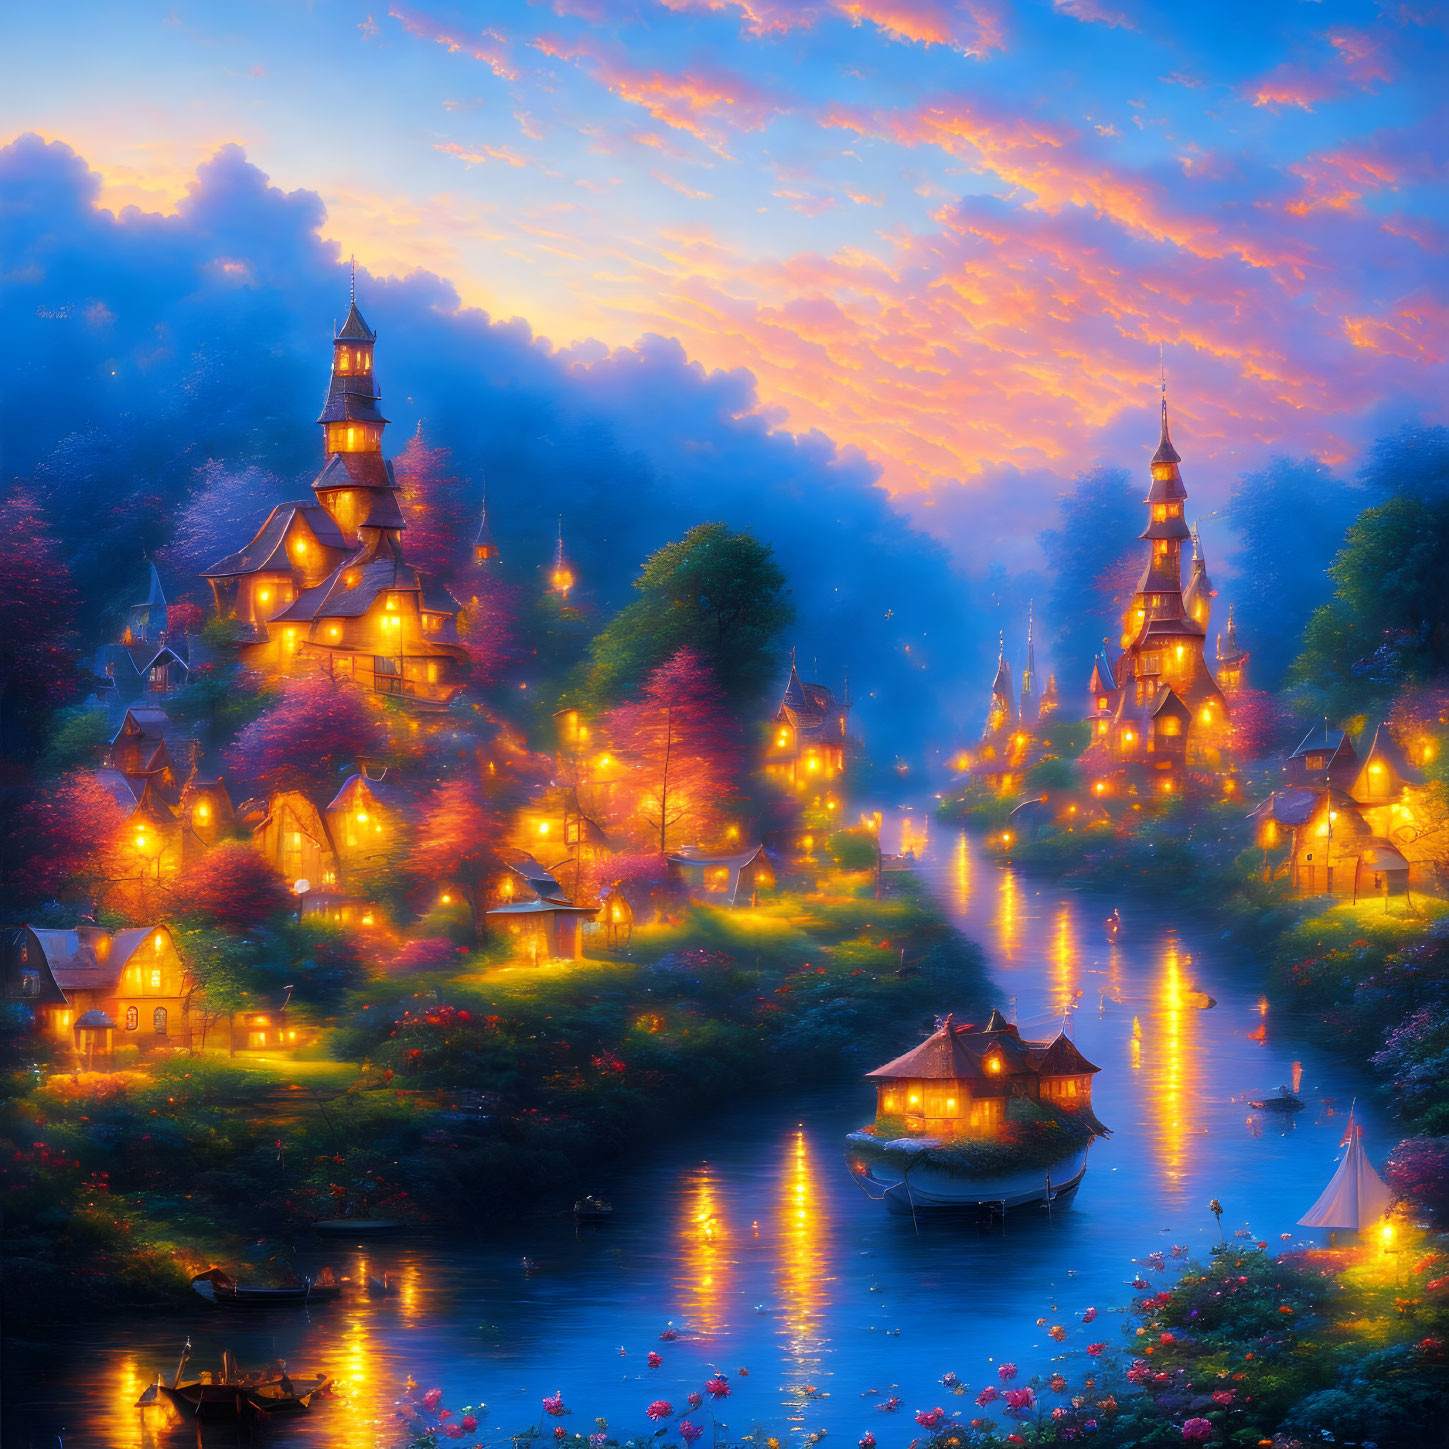 Fantasy village with illuminated buildings by winding river at sunset